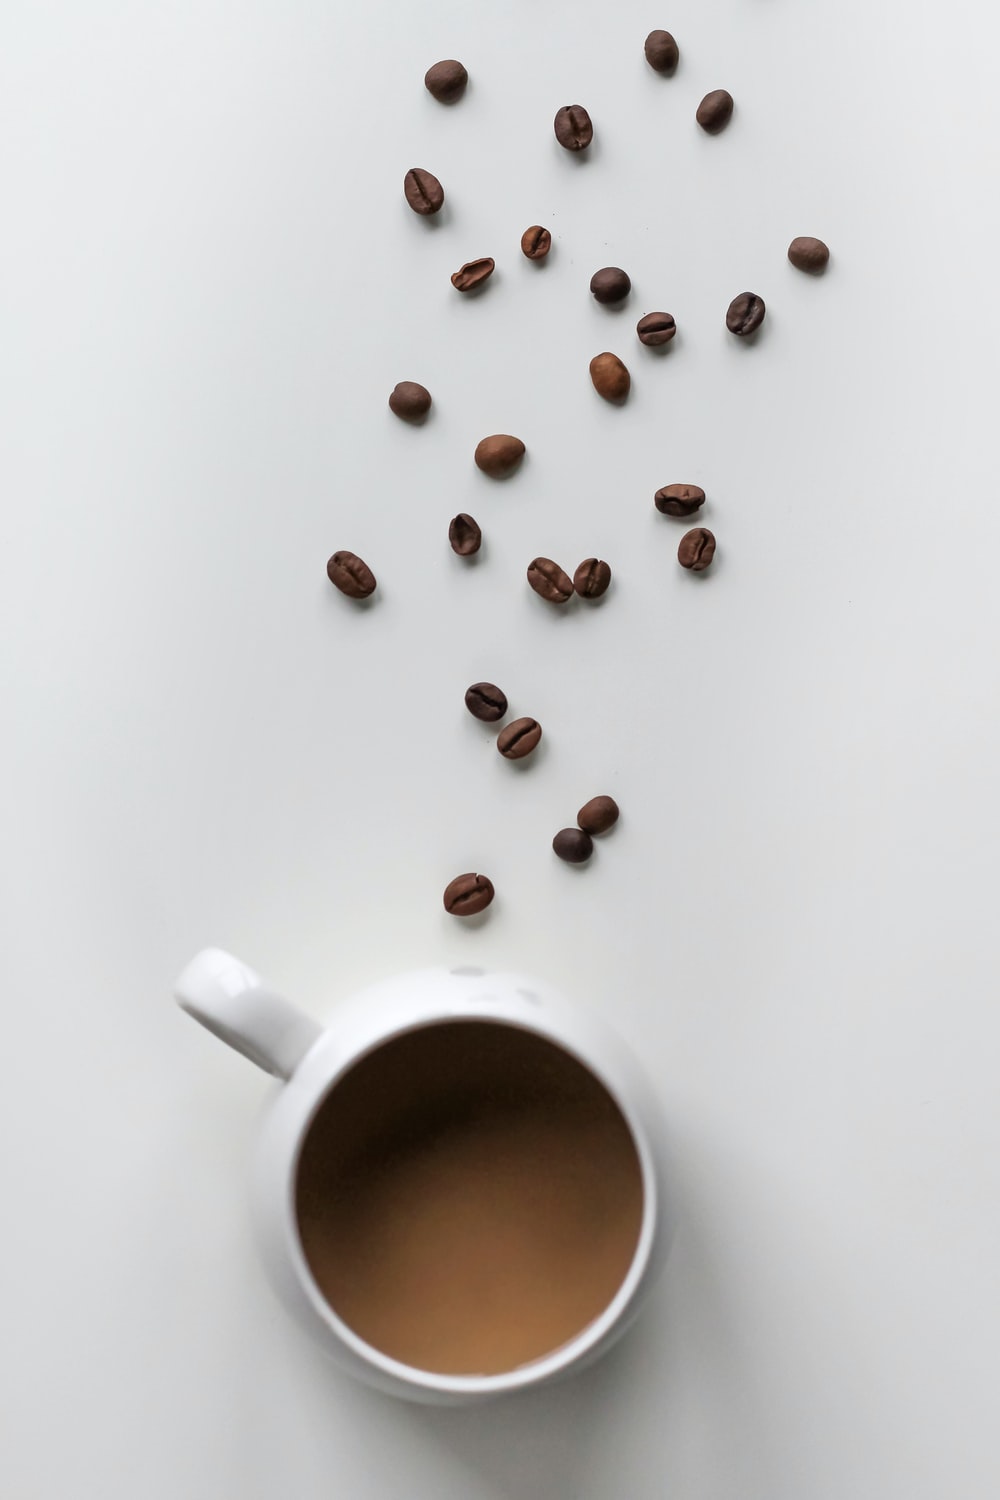 Minimal Coffee Picture. Download Free Image